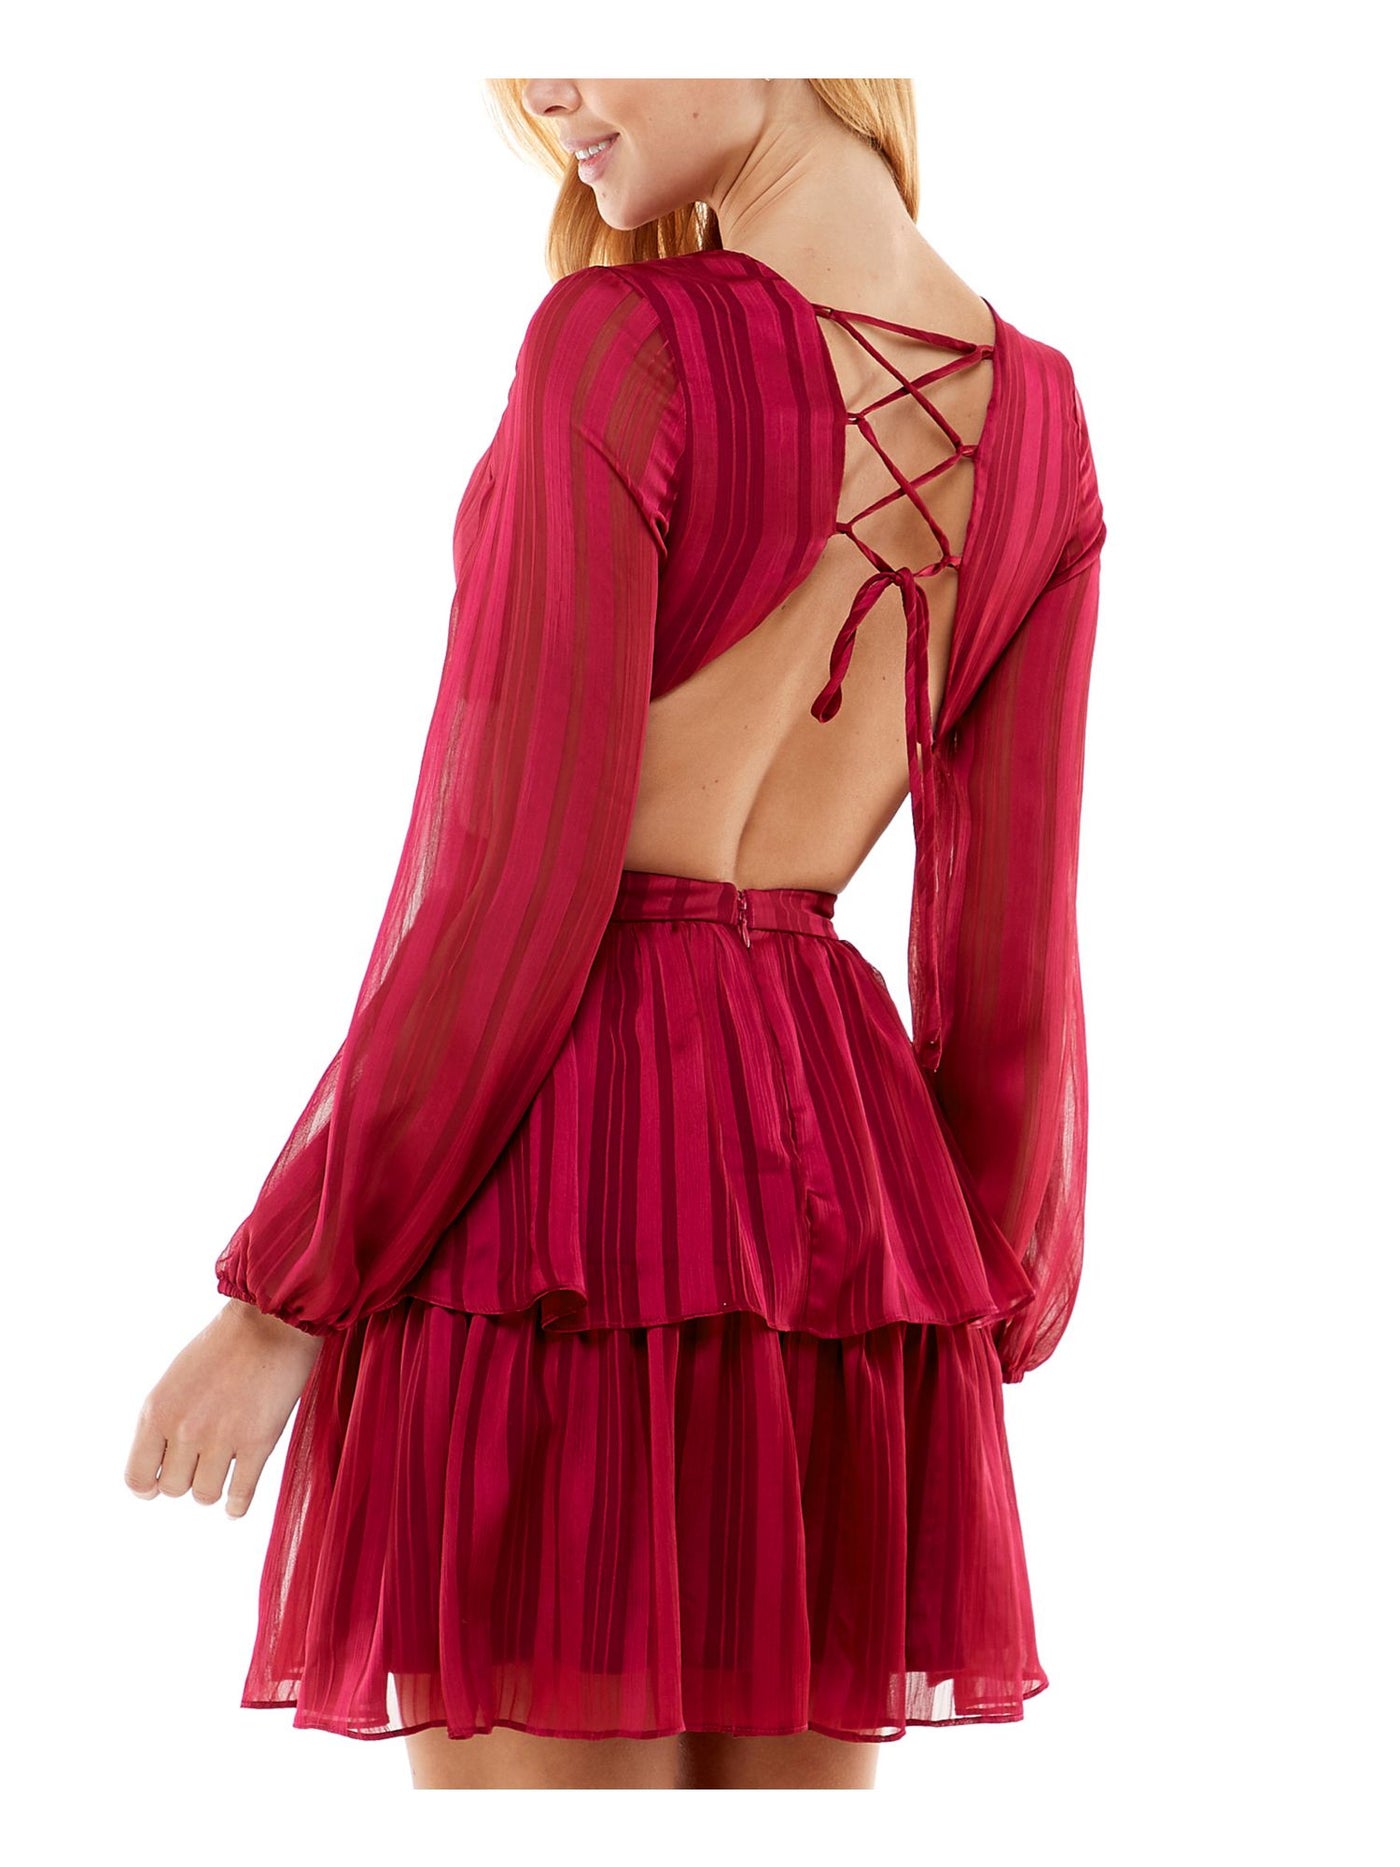 CITY STUDIO Womens Red Cut Out Rhinestone Lace-up Back Corset Sheer Striped Blouson Sleeve V Neck Mini Party Fit + Flare Dress Juniors 5